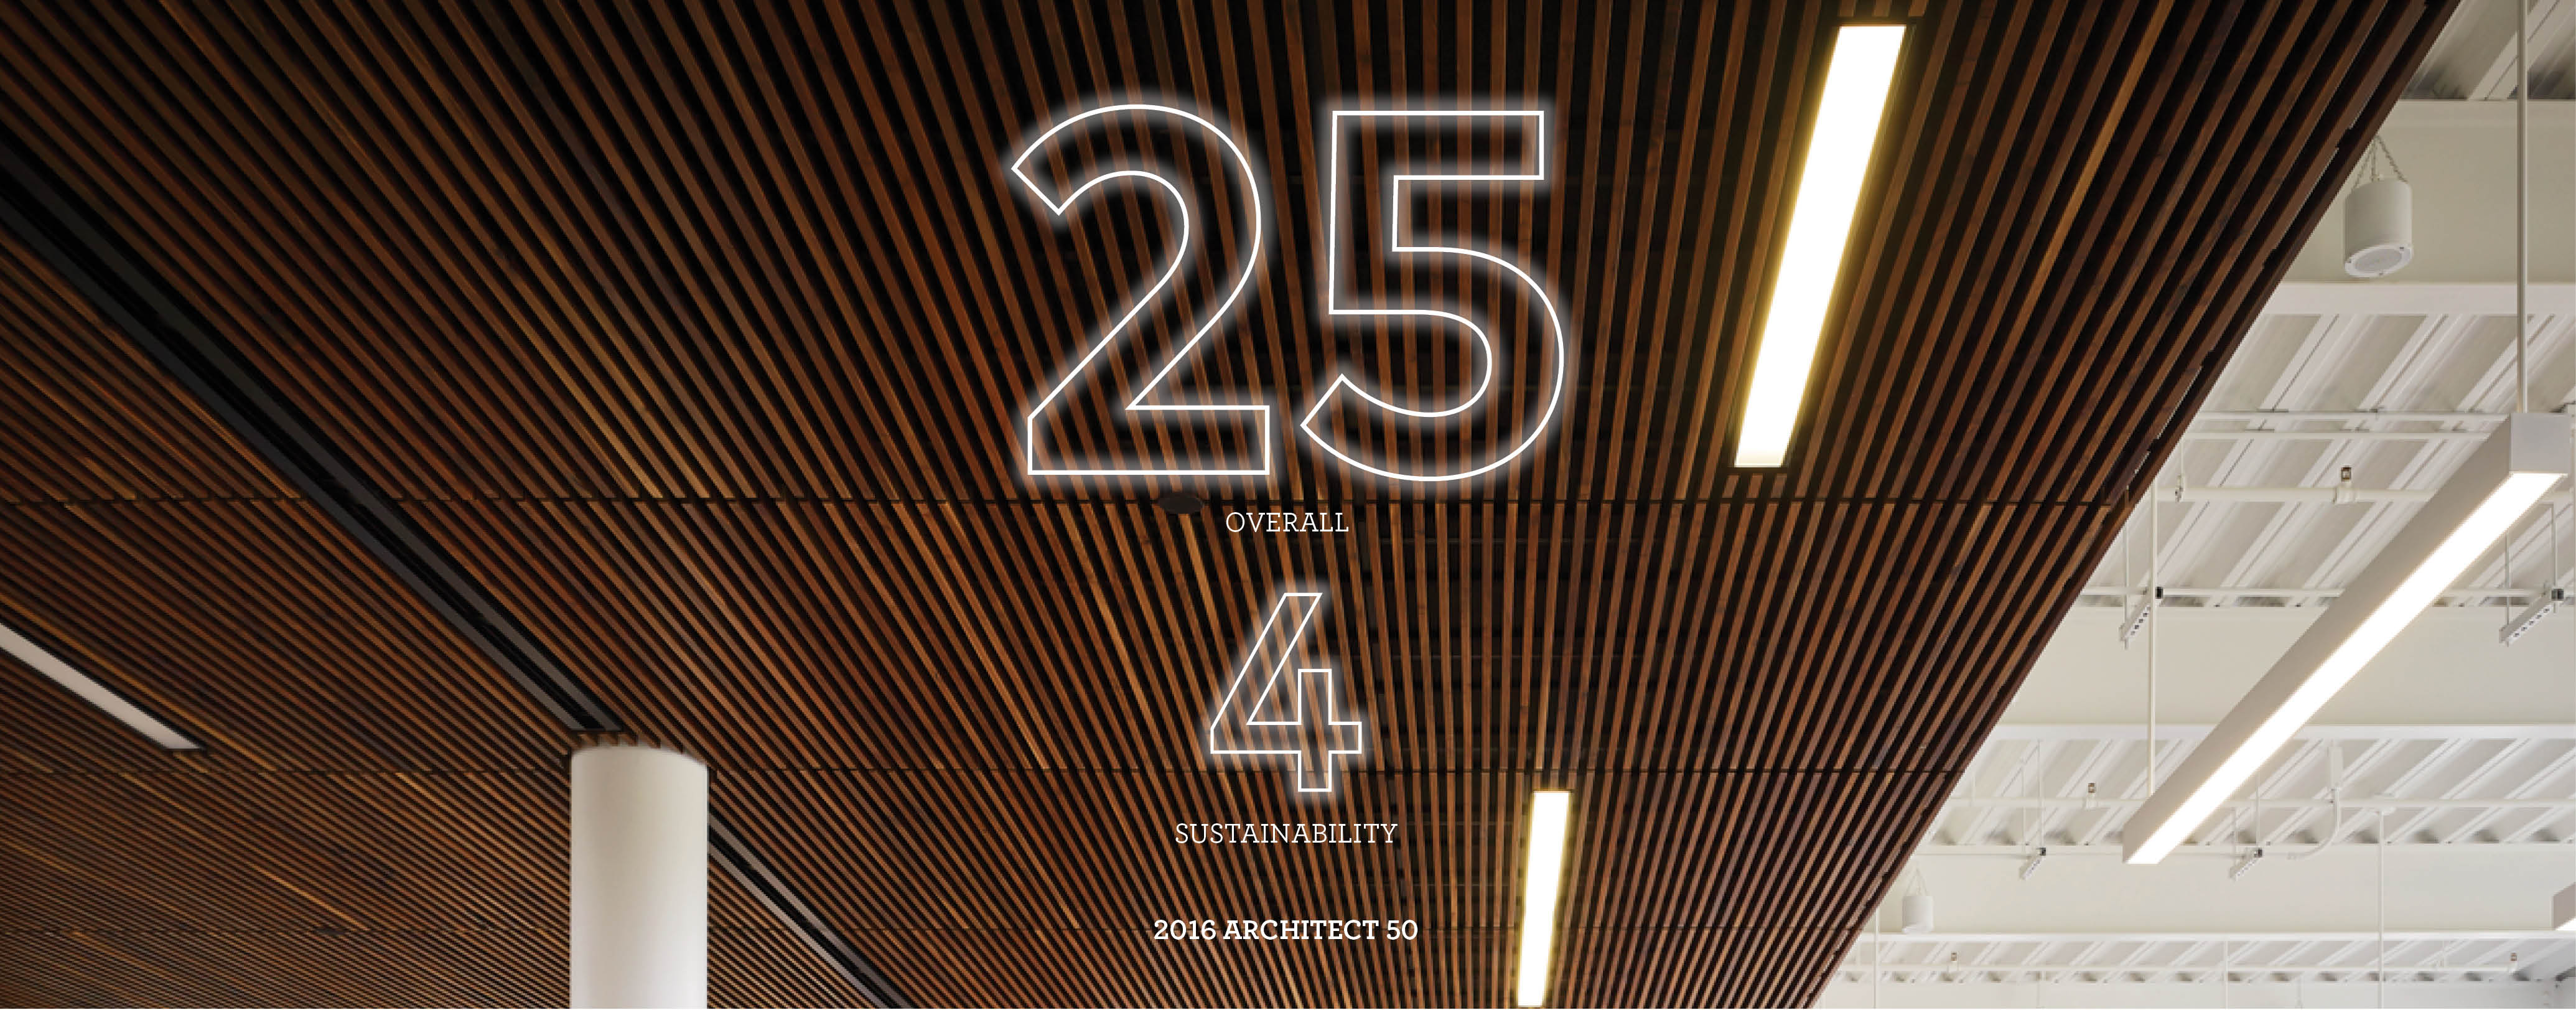 BNIM Named Number 25 on the Architect 50 National Ranking